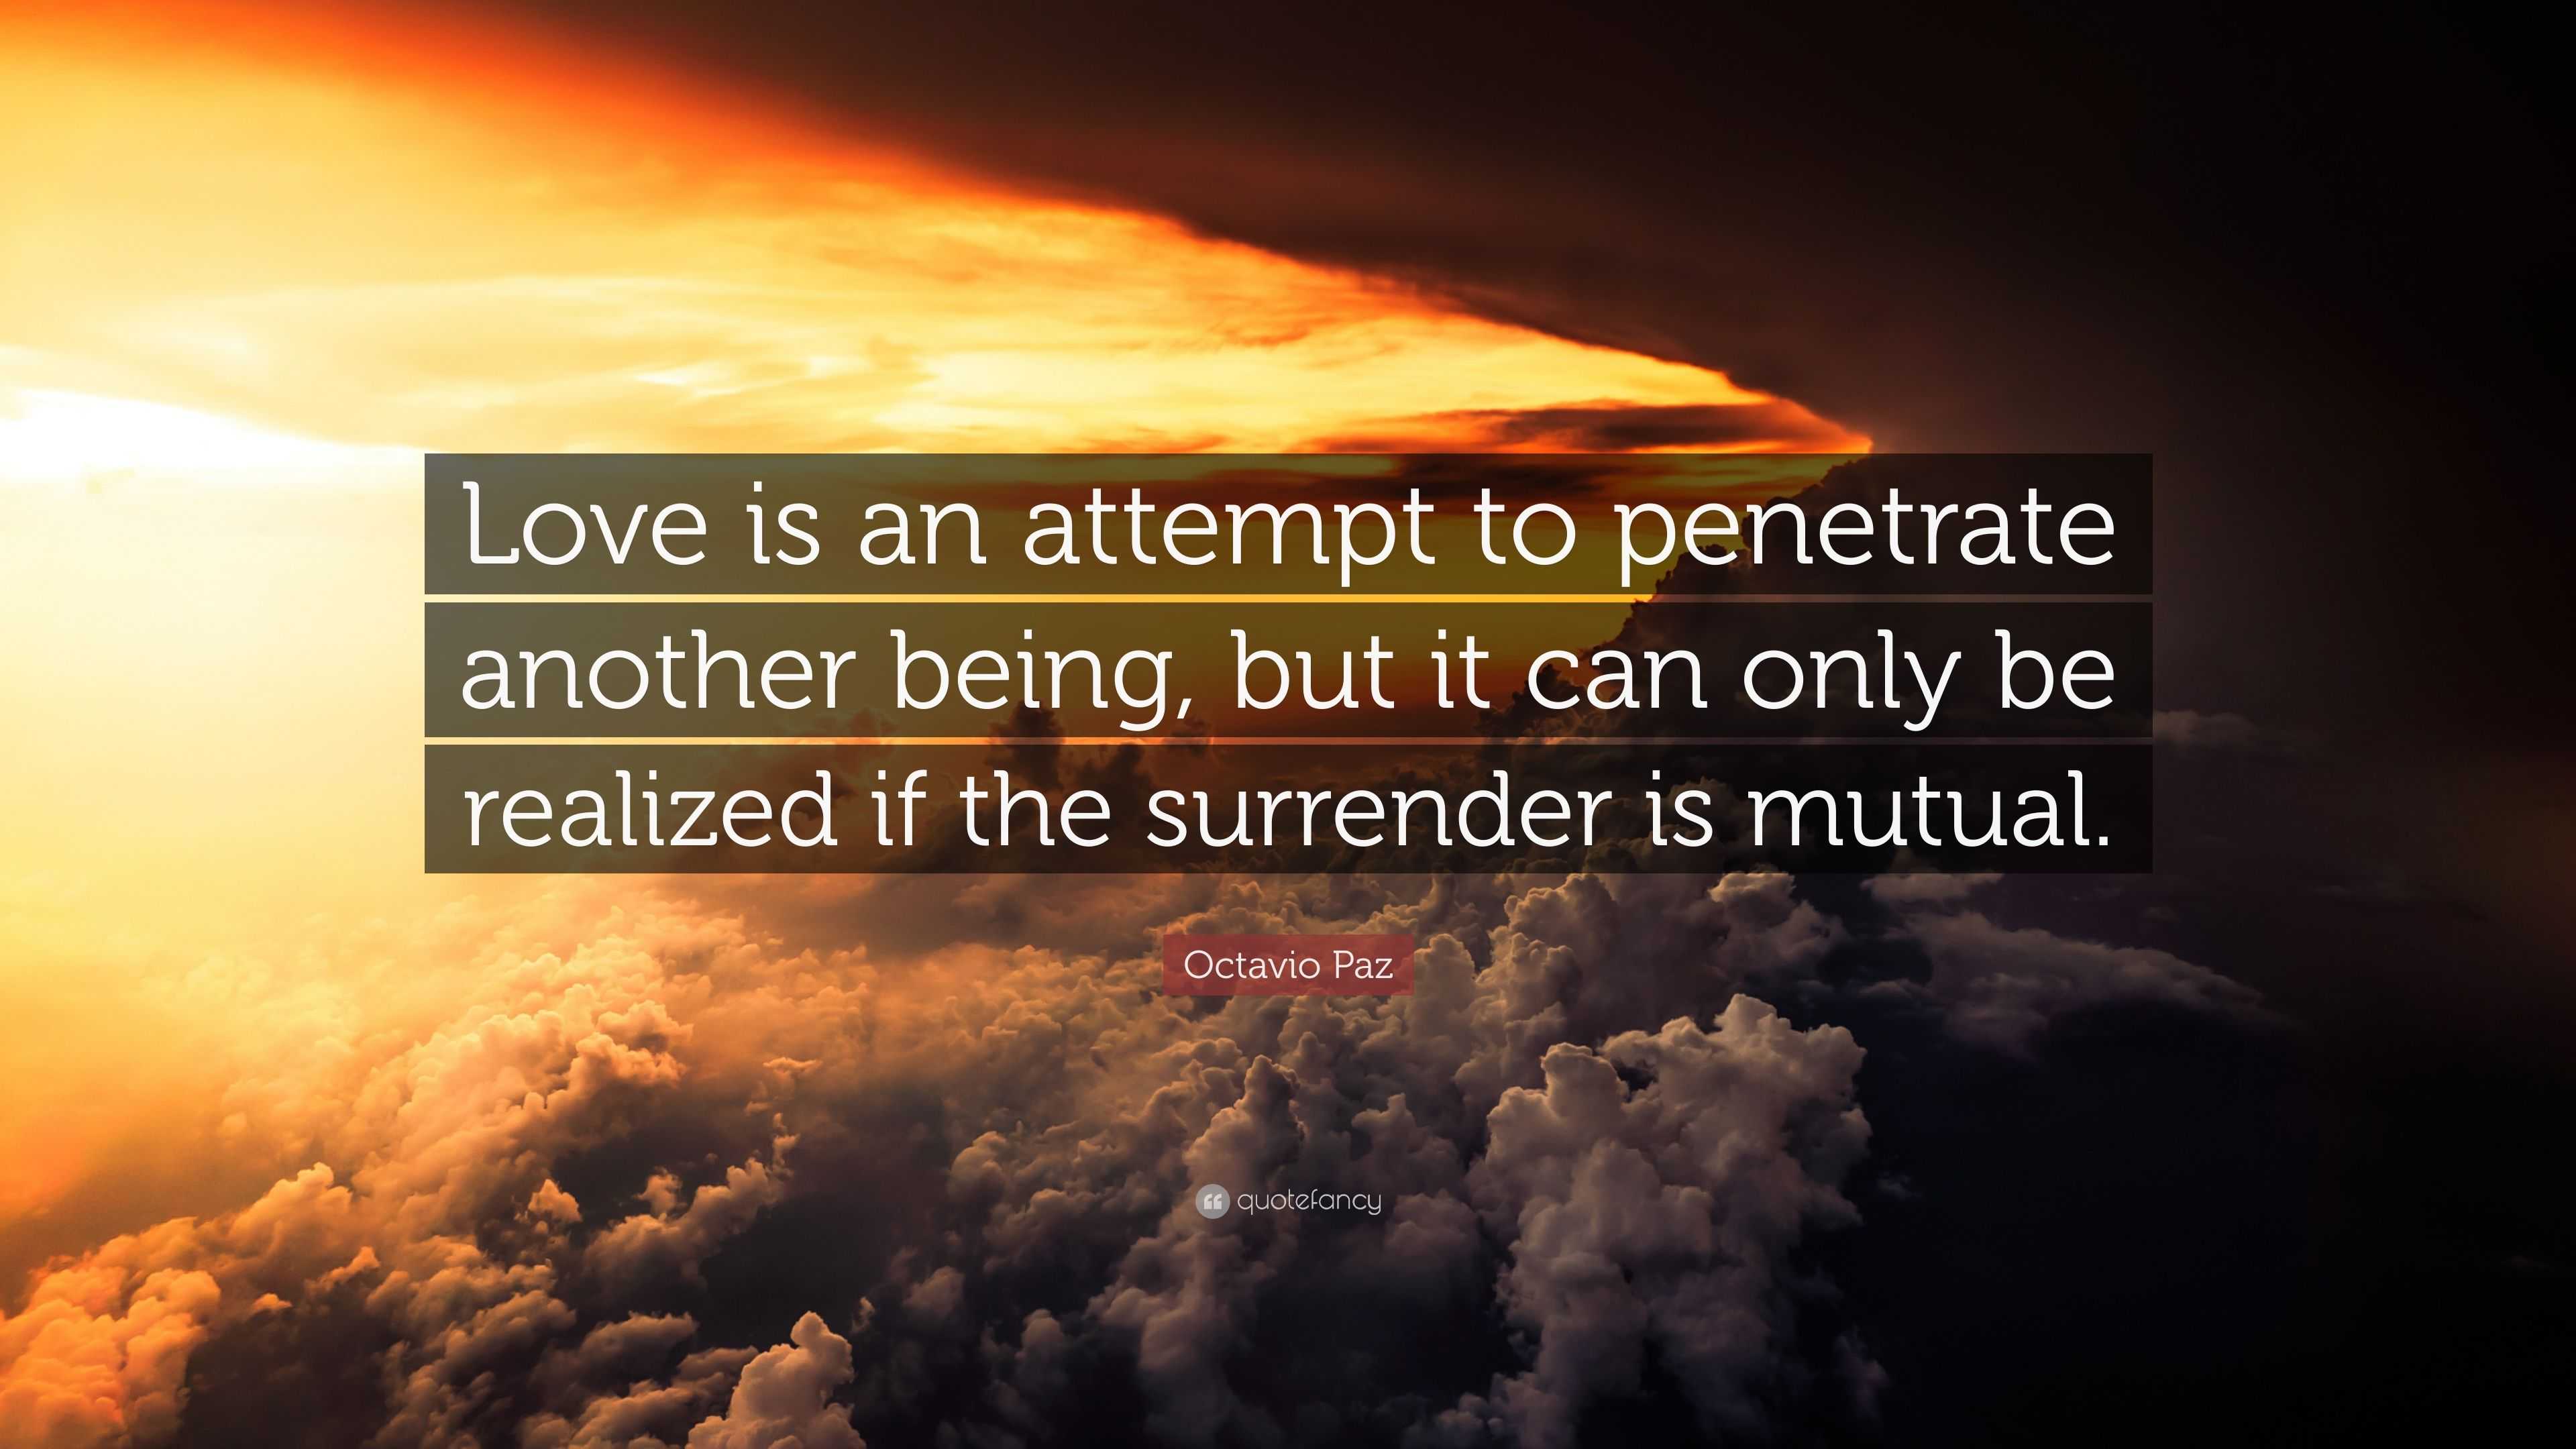 Octavio Paz Quote: "Love is an attempt to penetrate another being, but it can only be realized ...